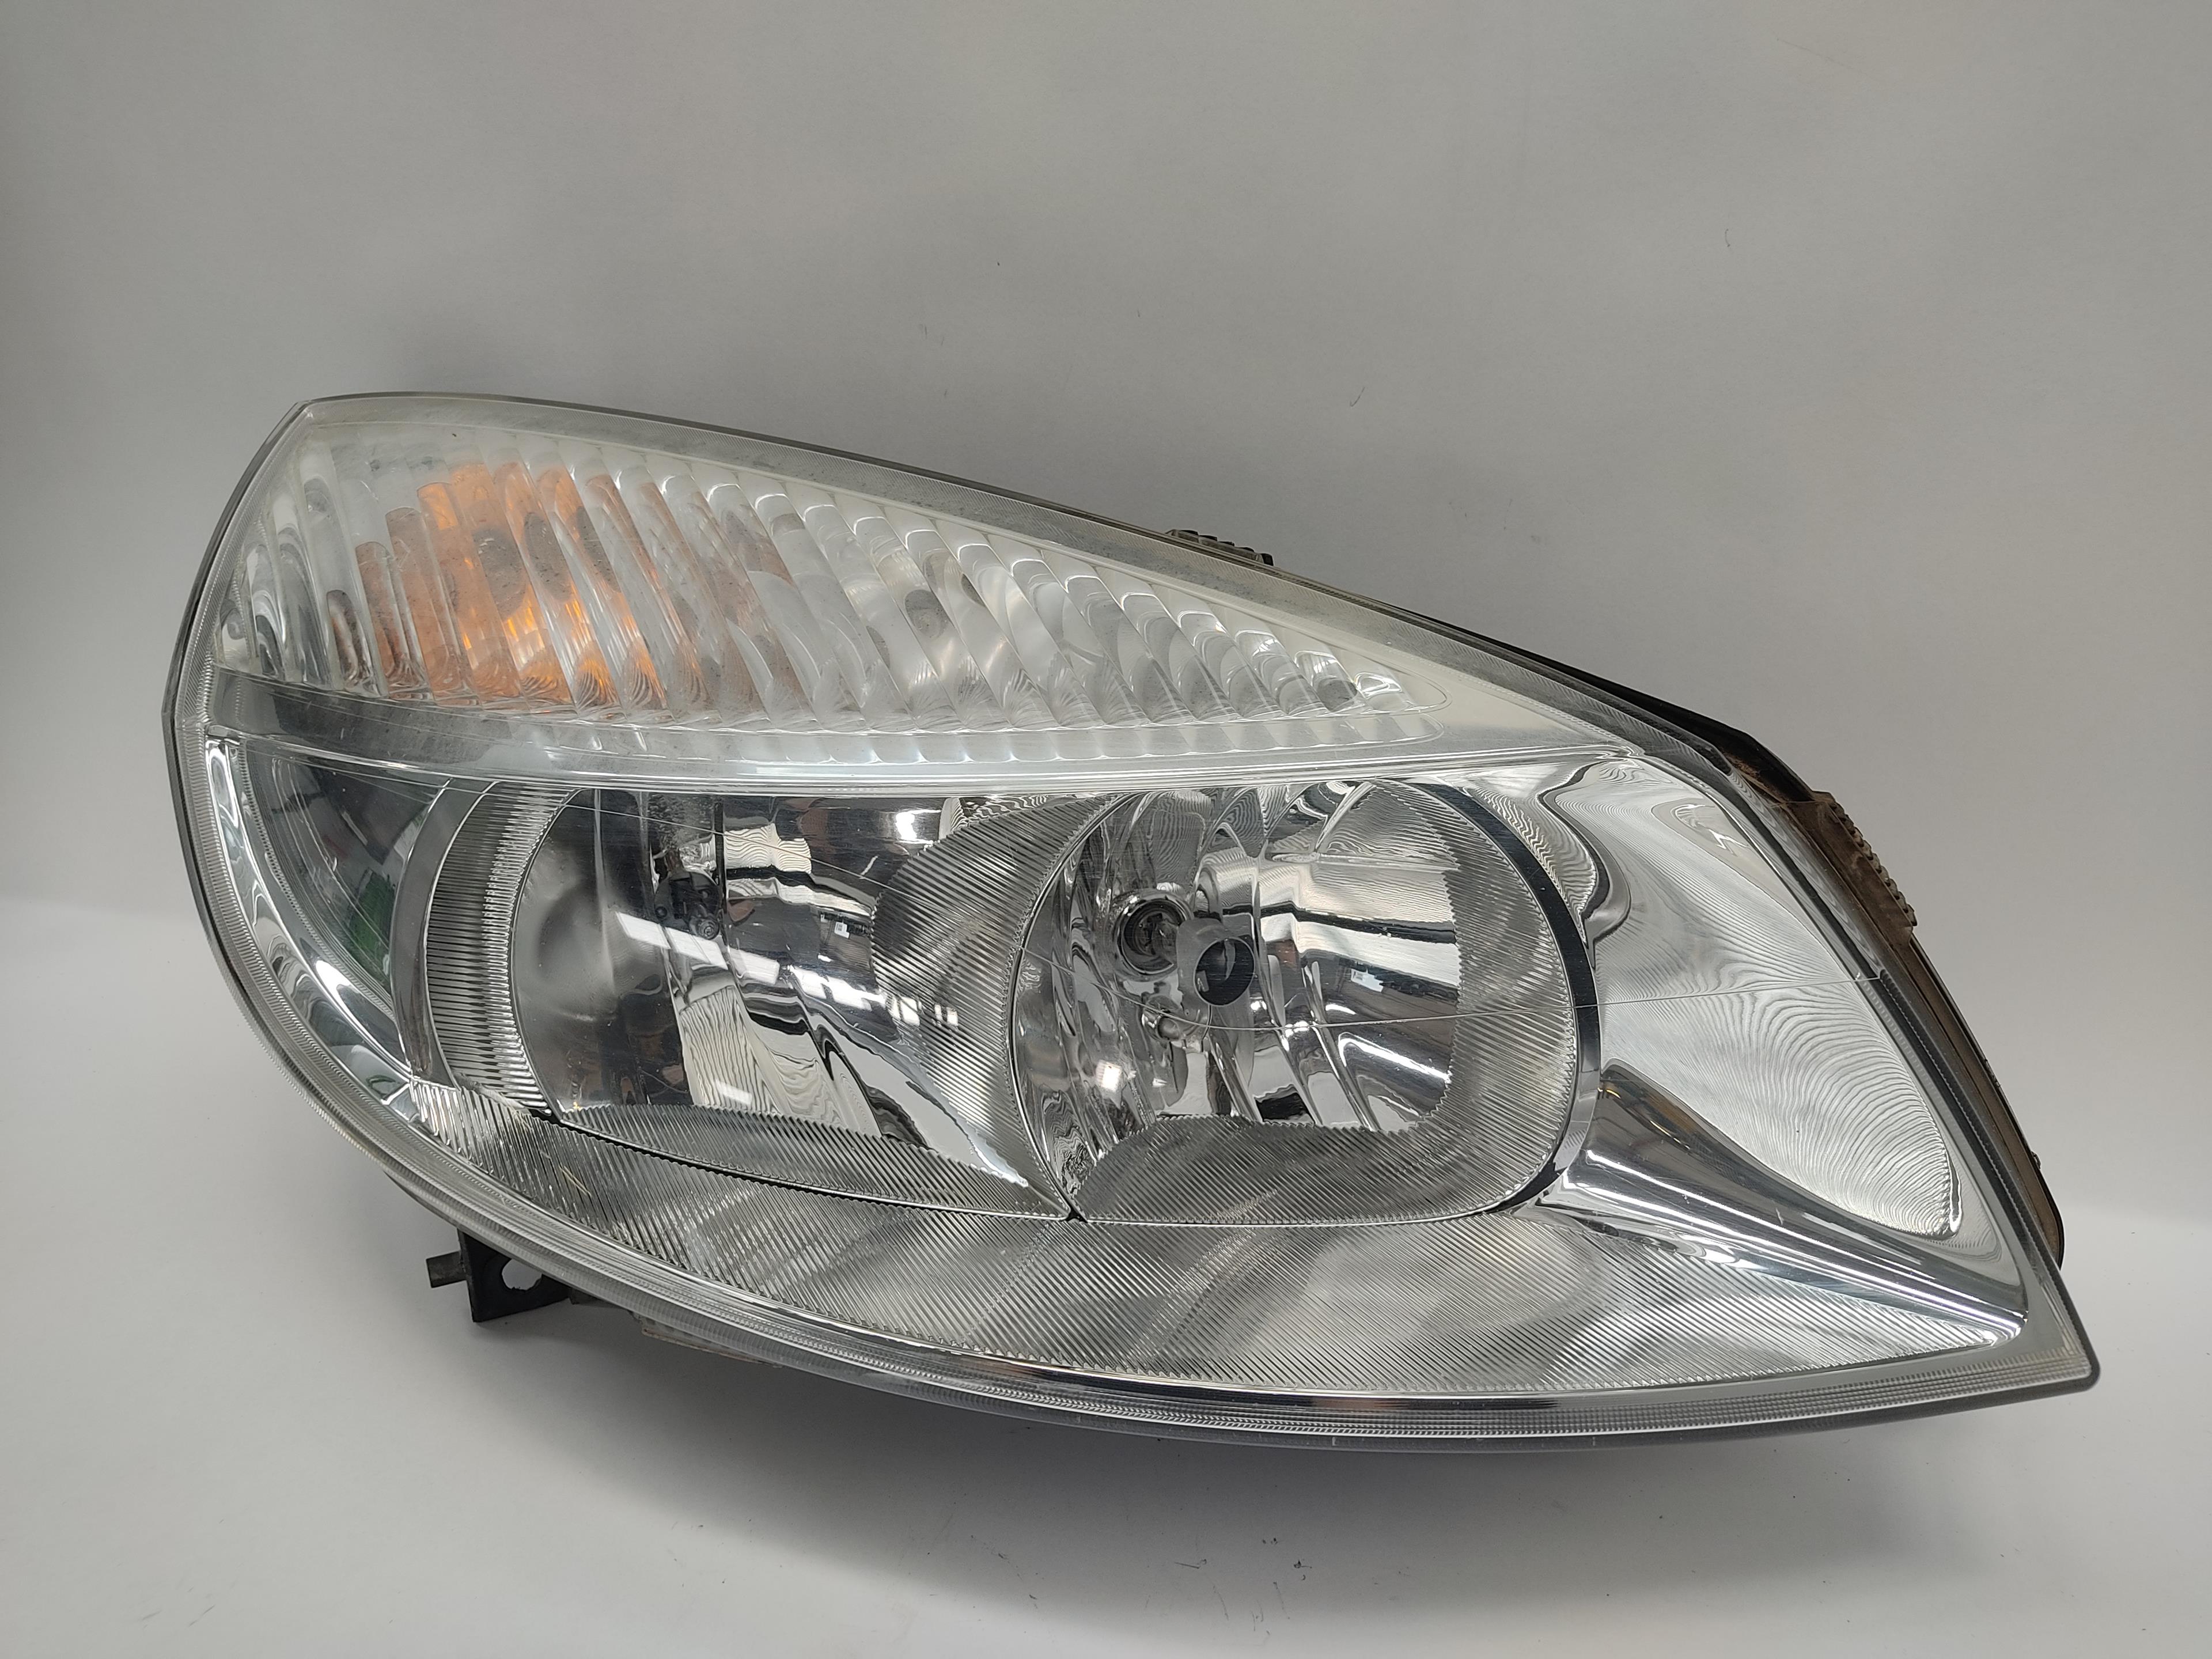 RENAULT Scenic 2 generation (2003-2010) Front Right Headlight 260102336R, 15810400RE, 7701056126 24907773